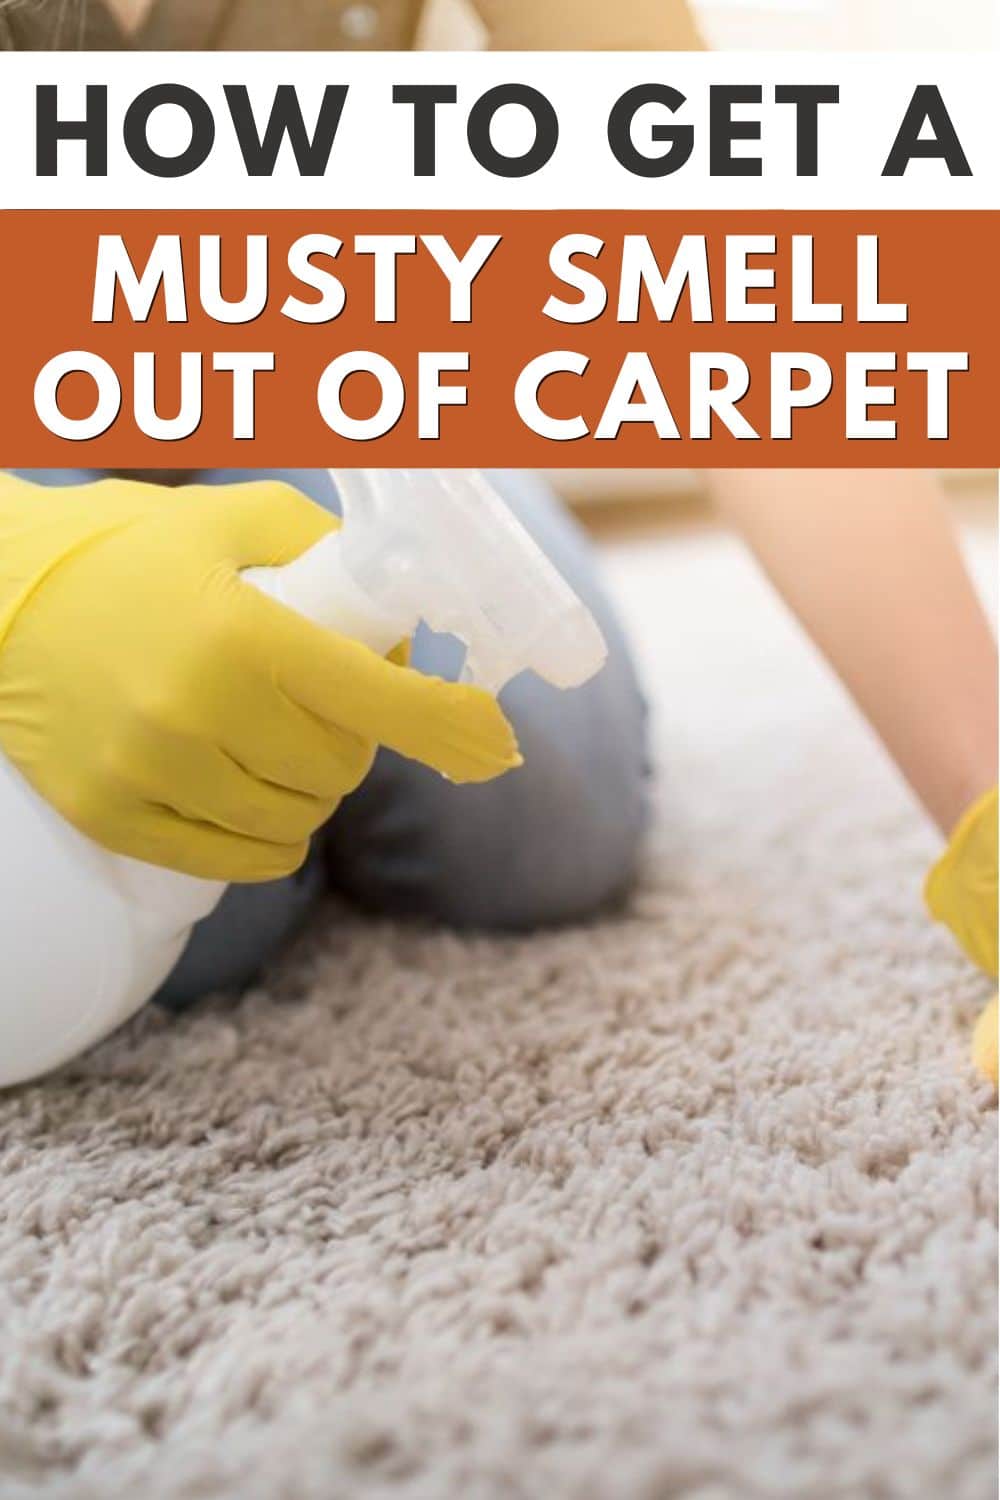 Woman cleaning carpet using a spray bottle, with text "How to get a musty smell out of carpet".